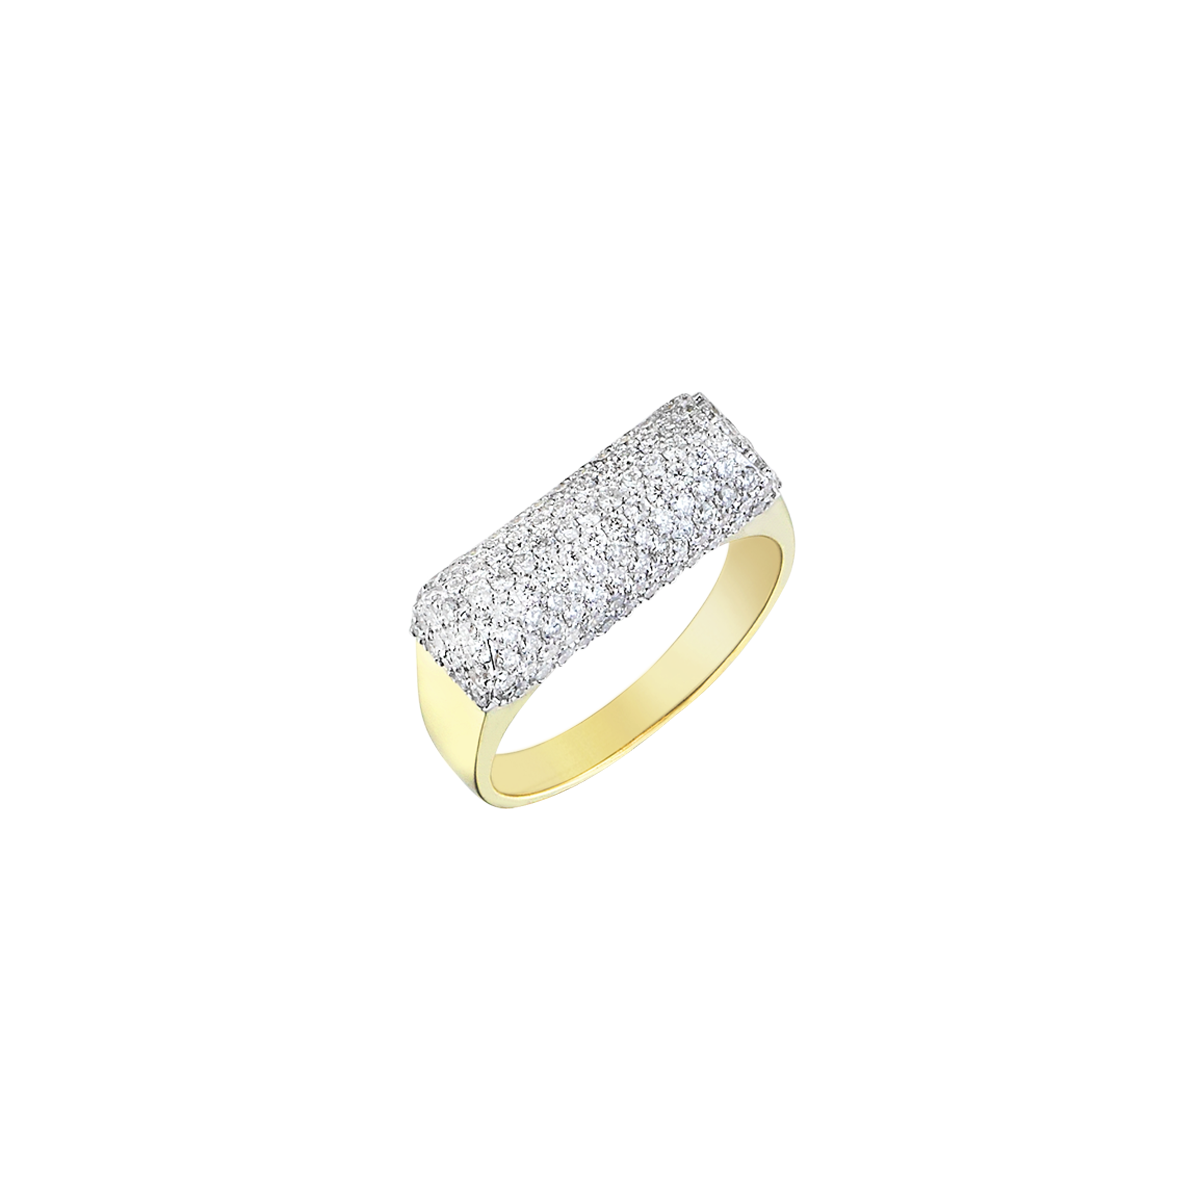 Pave Mountain Ring in Yellow Gold - Her Story Shop